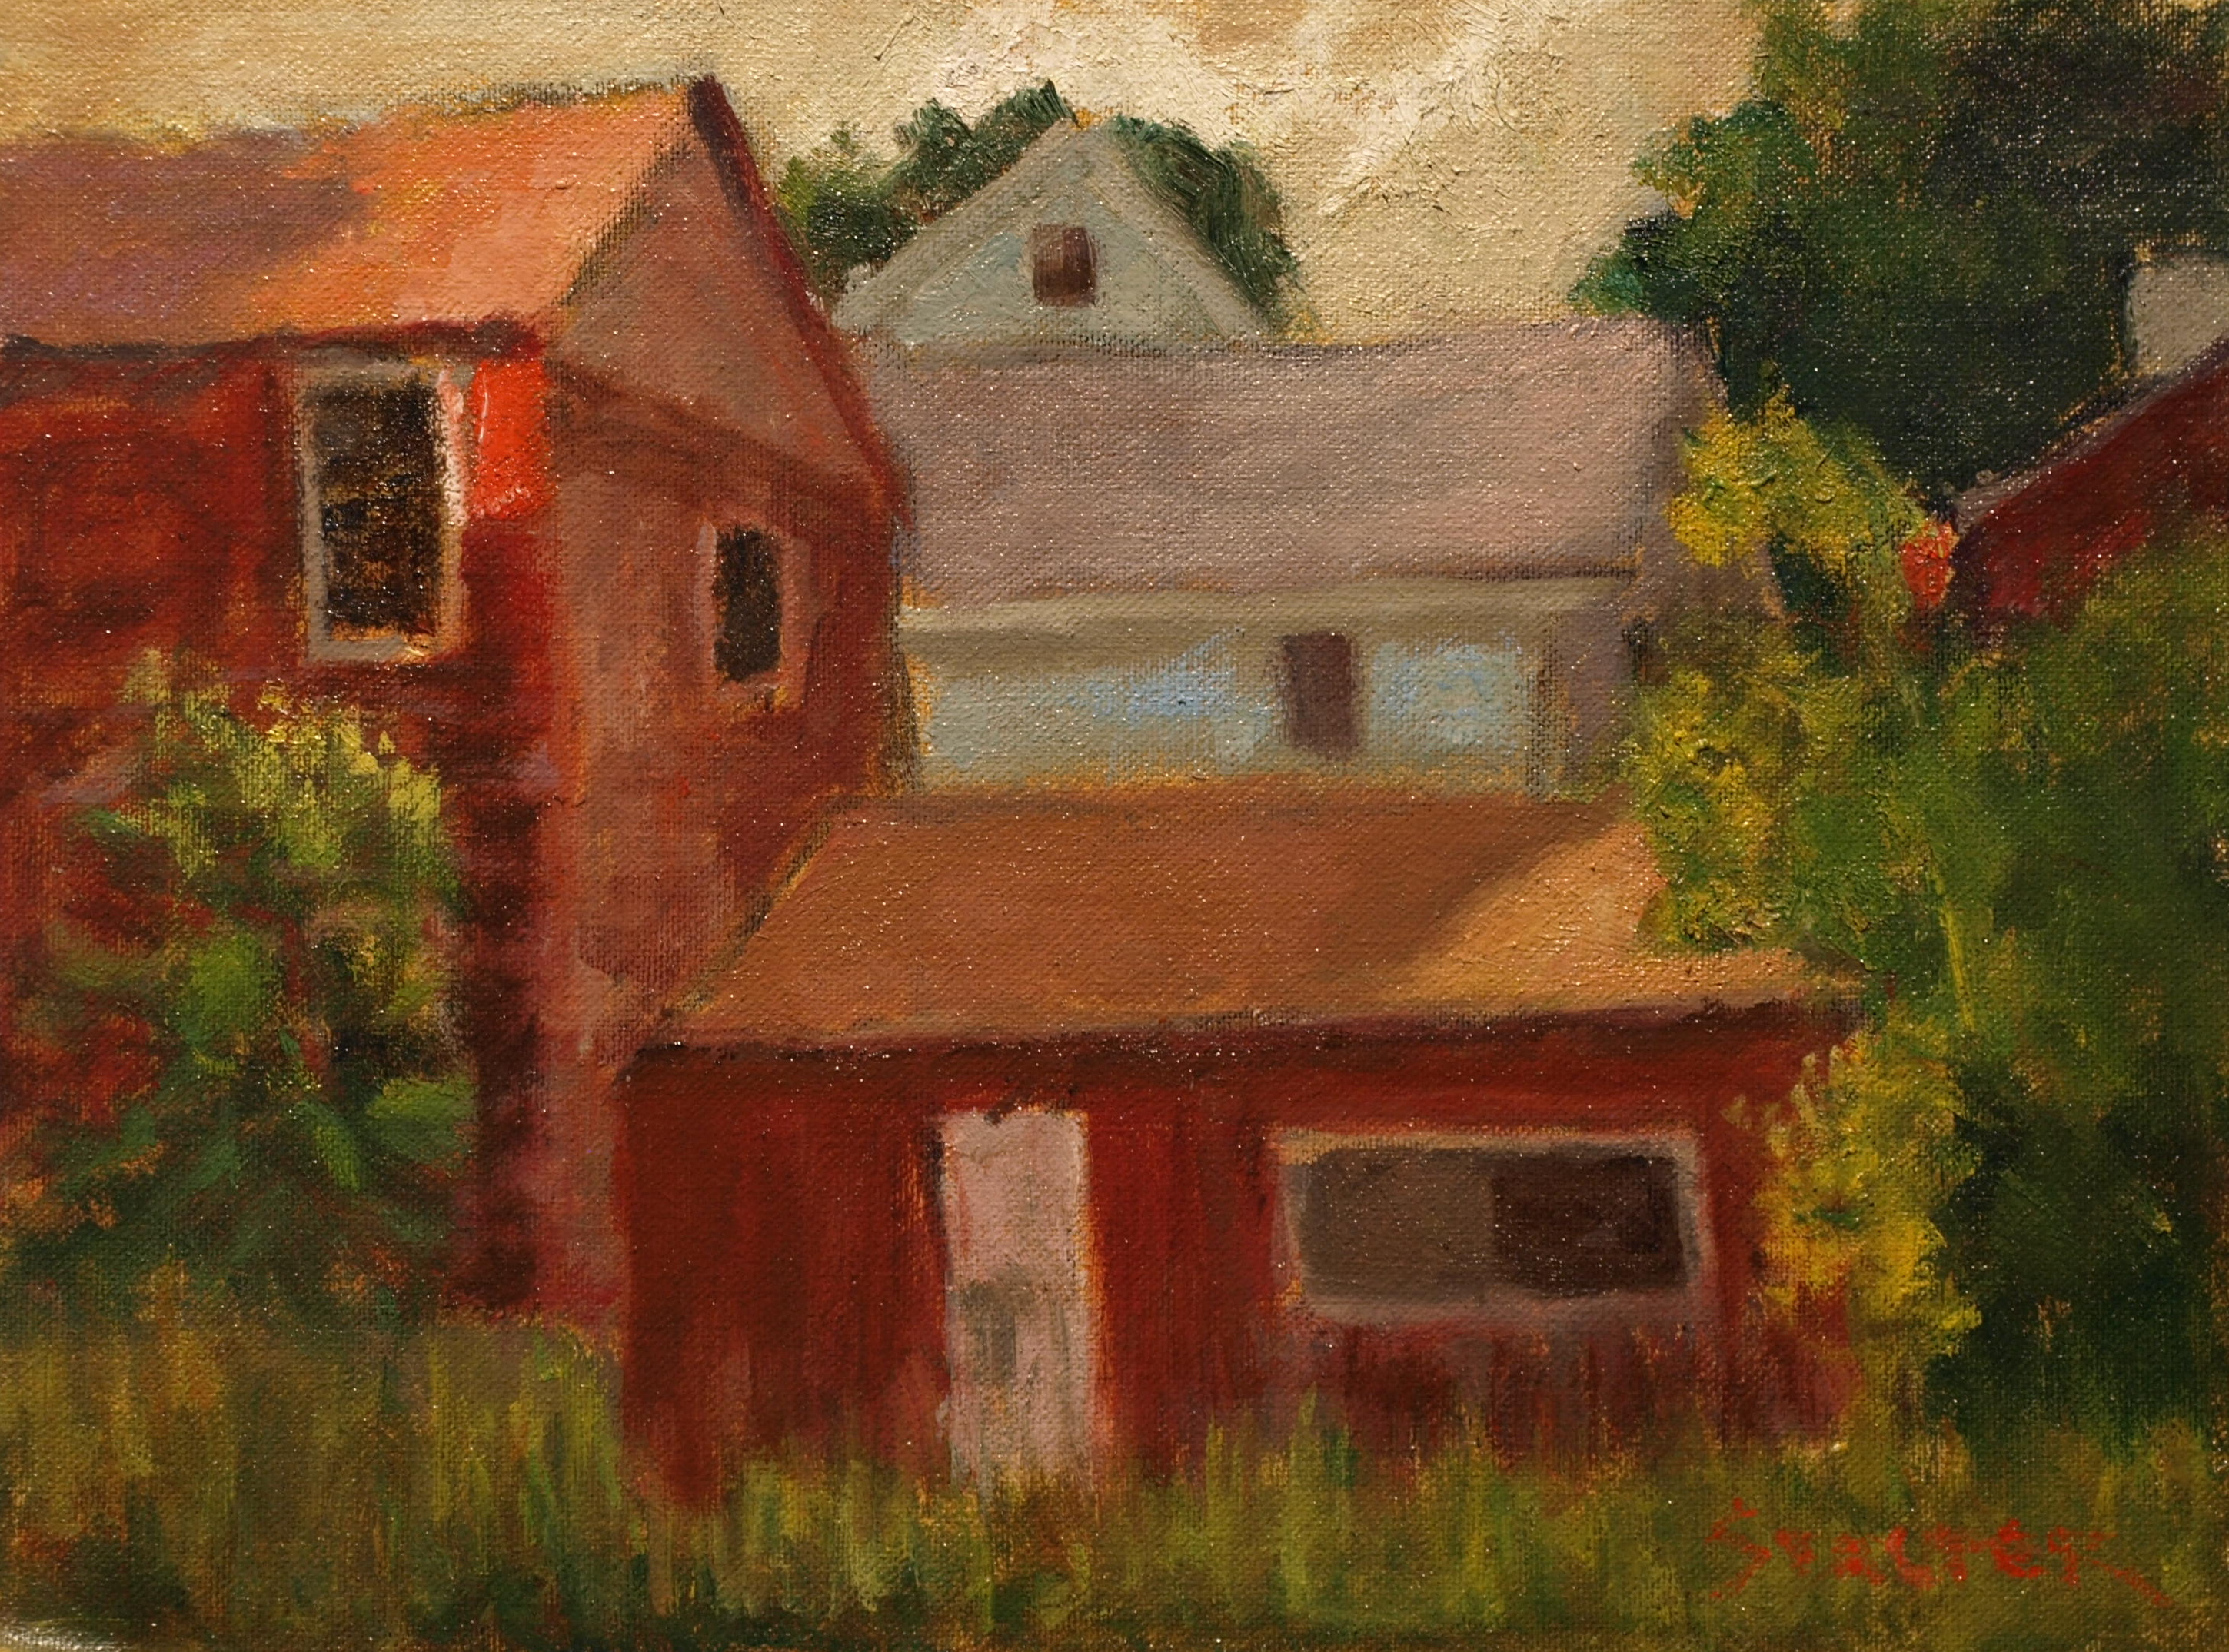 Abandoned Barns, Oil on Canvas on Panel, 9 x 12 Inches, by Richard Stalter, $225